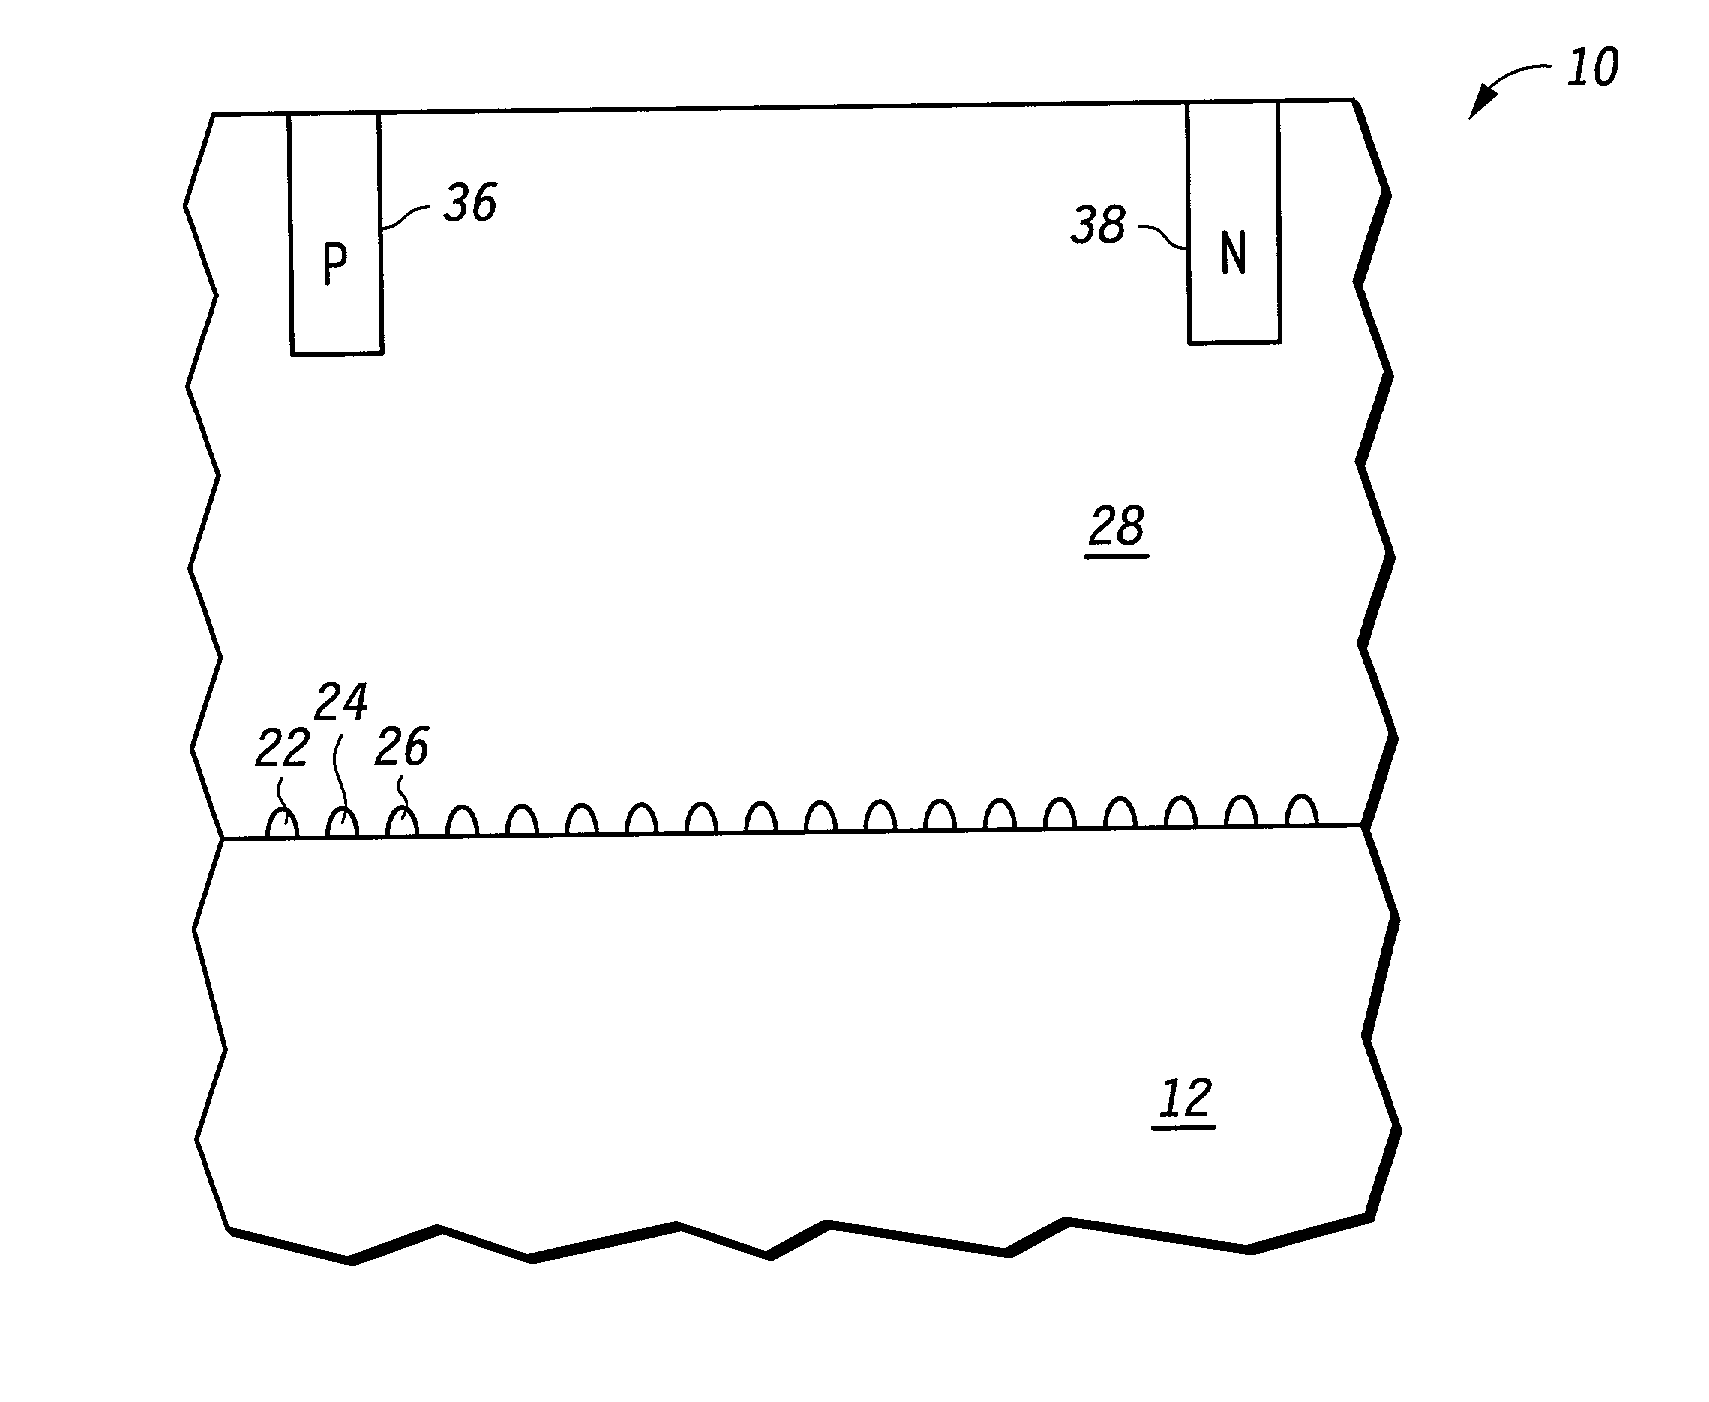 Semiconductor device and method therefor